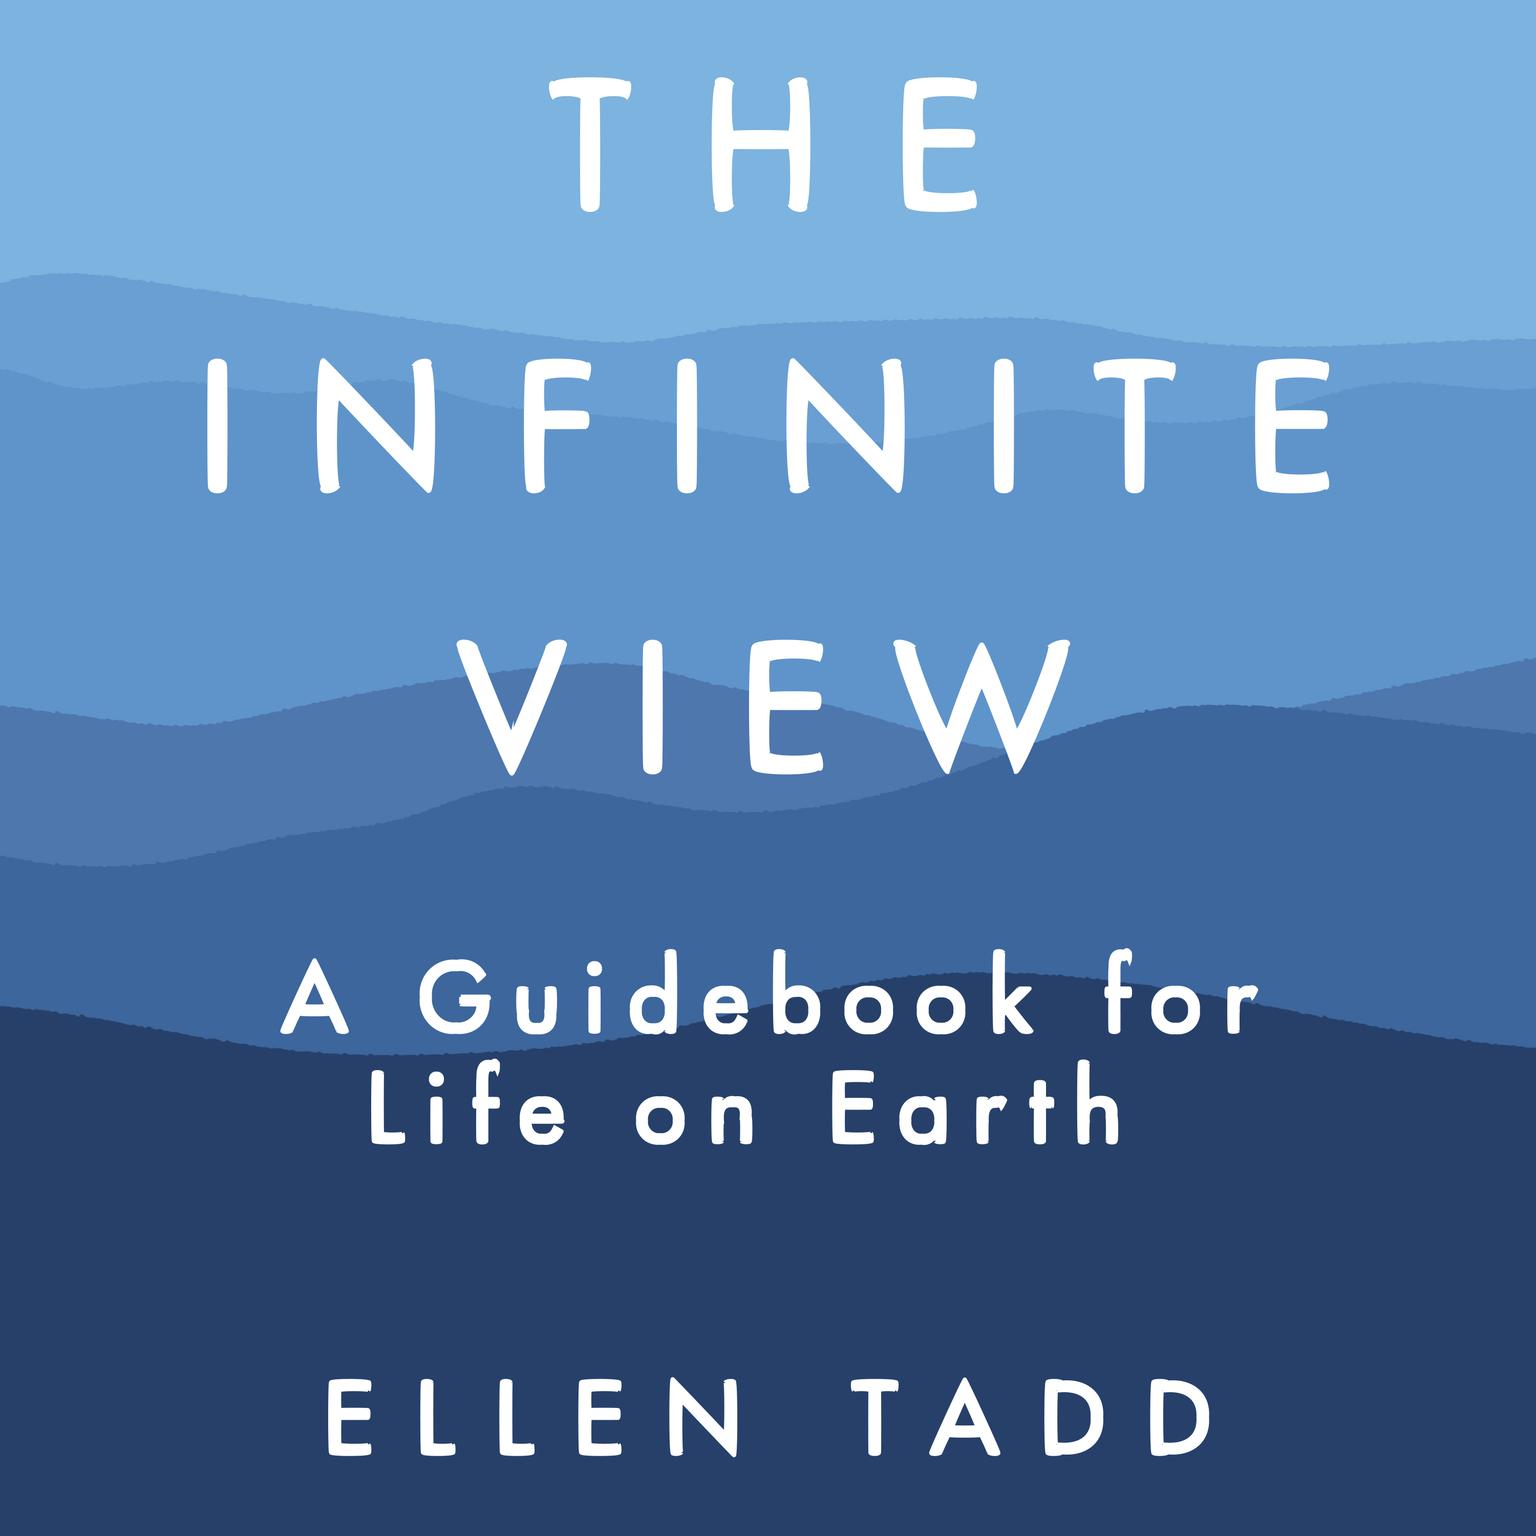 The Infinite View: A Guidebook for Life on Earth Audiobook, by Ellen Tadd